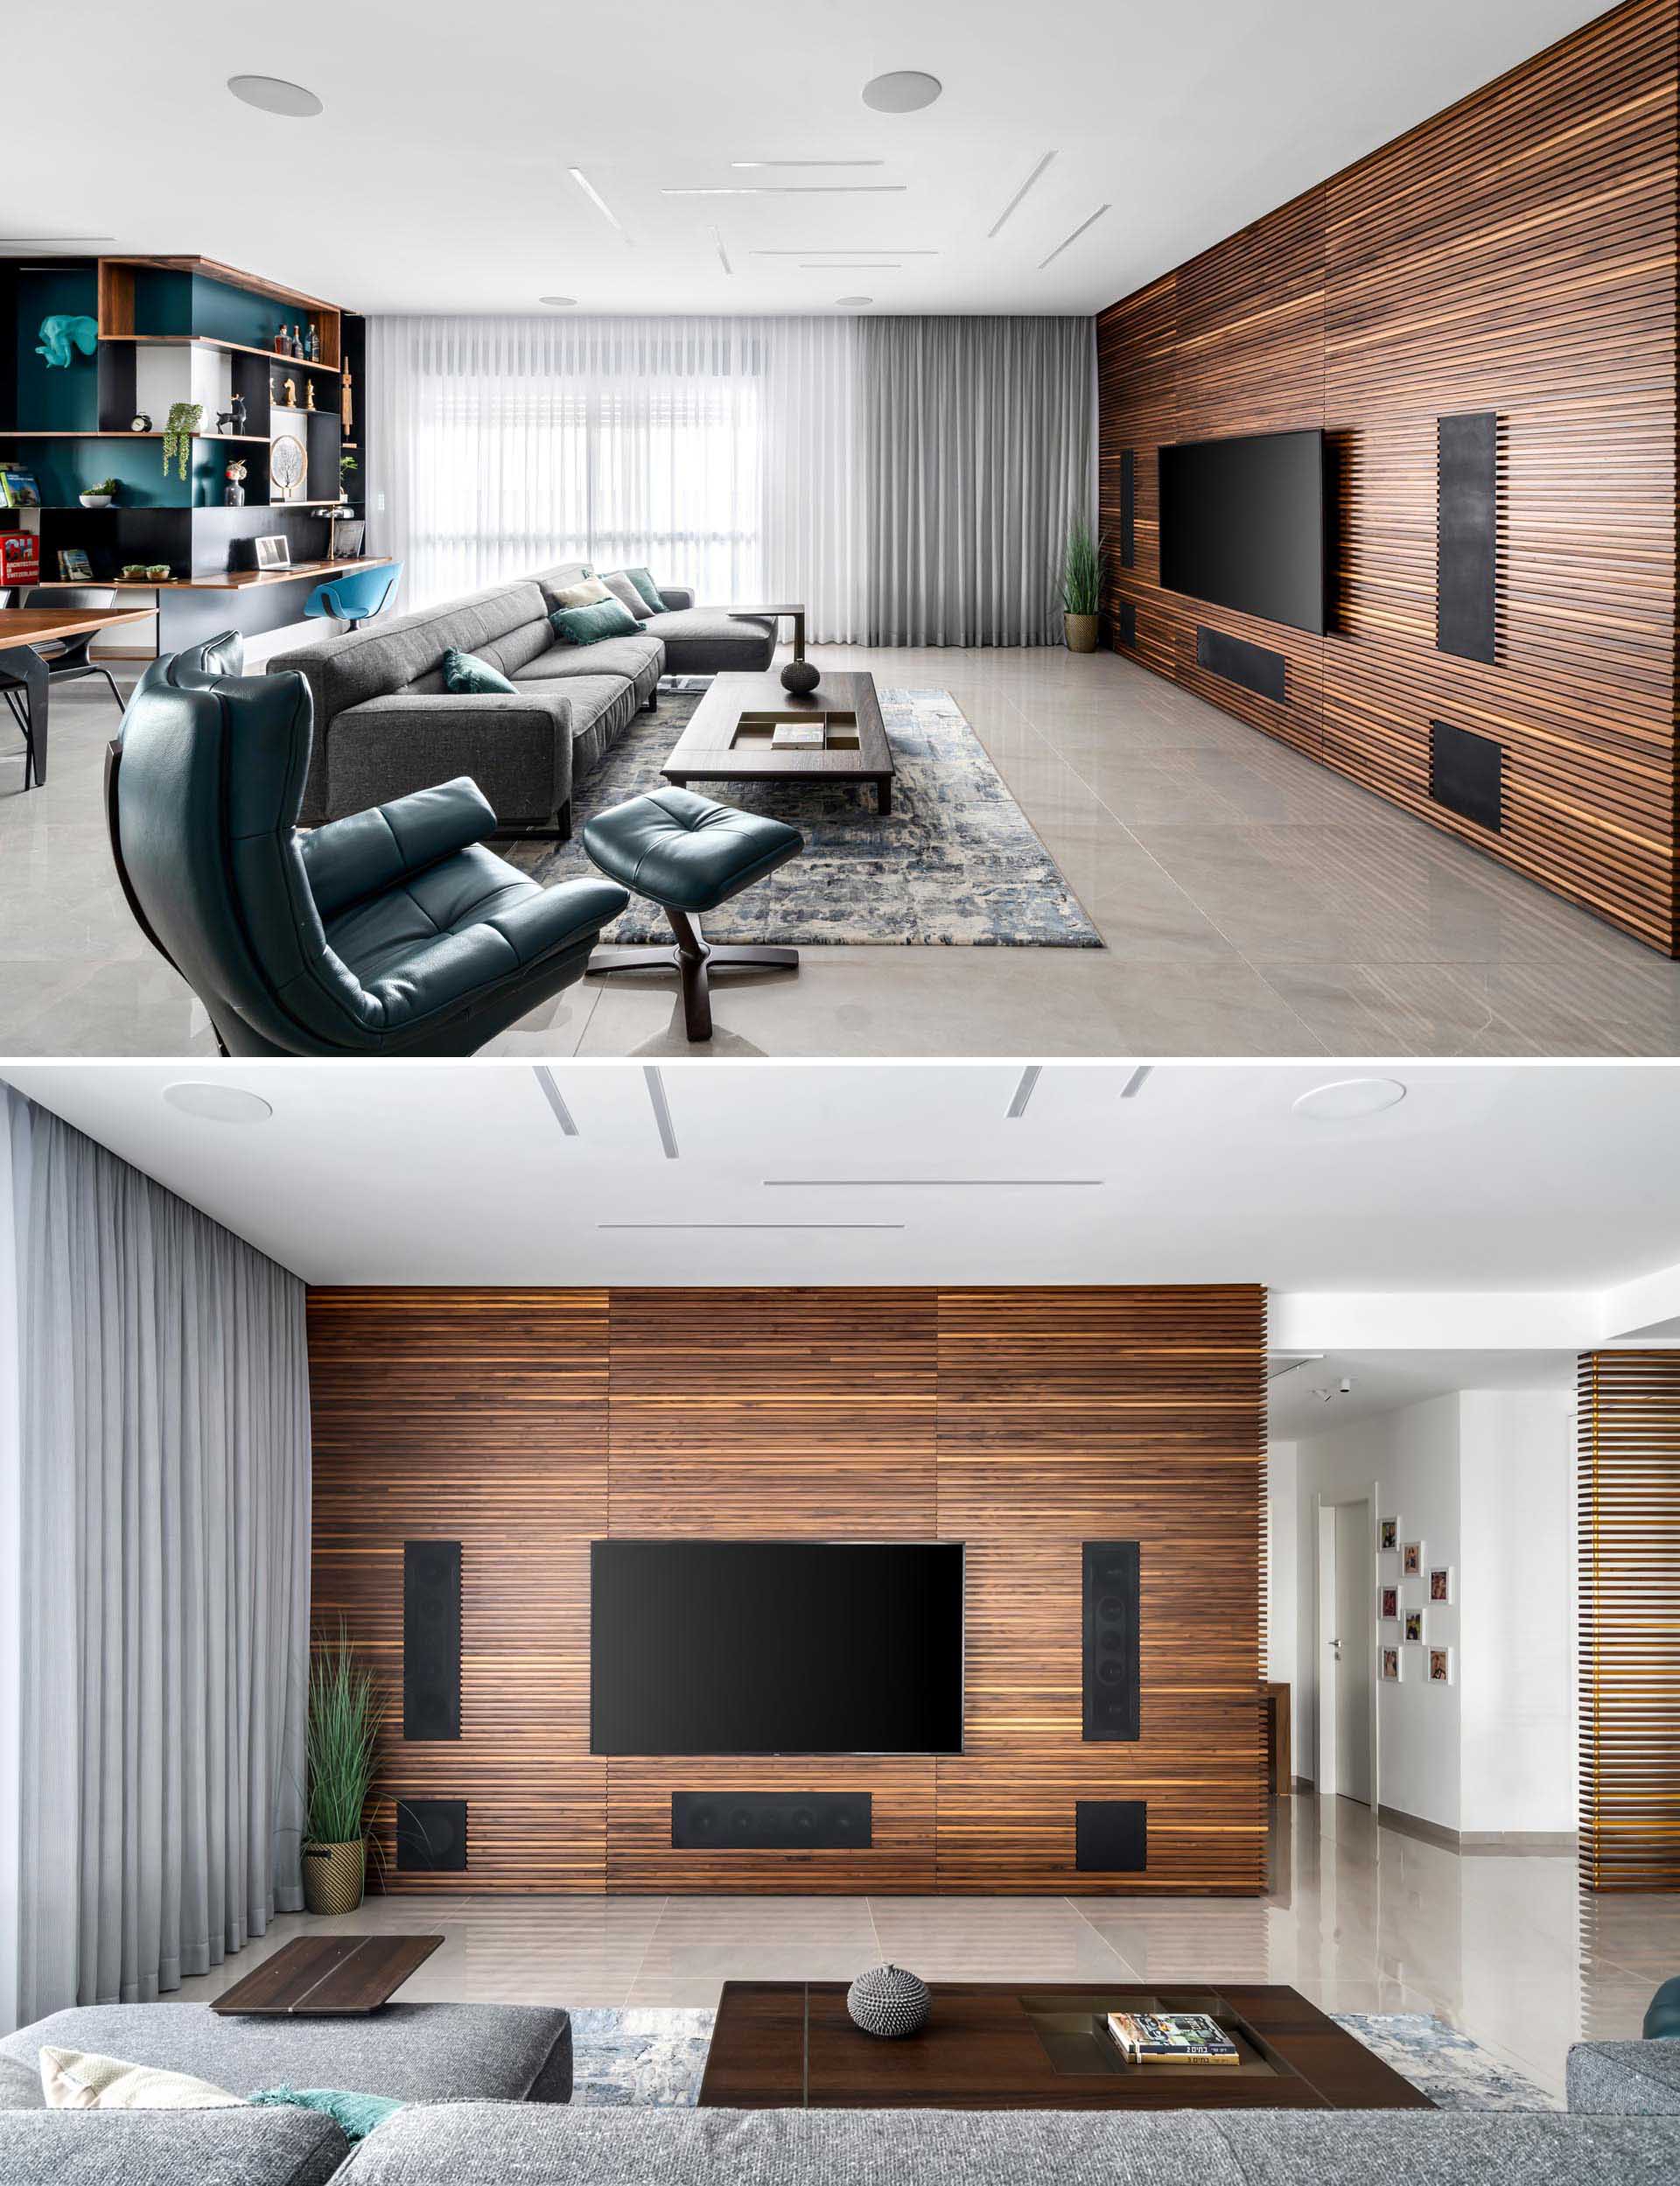 In this modern living room, a wood slat accent wall made from walnut becomes the backdrop for the television